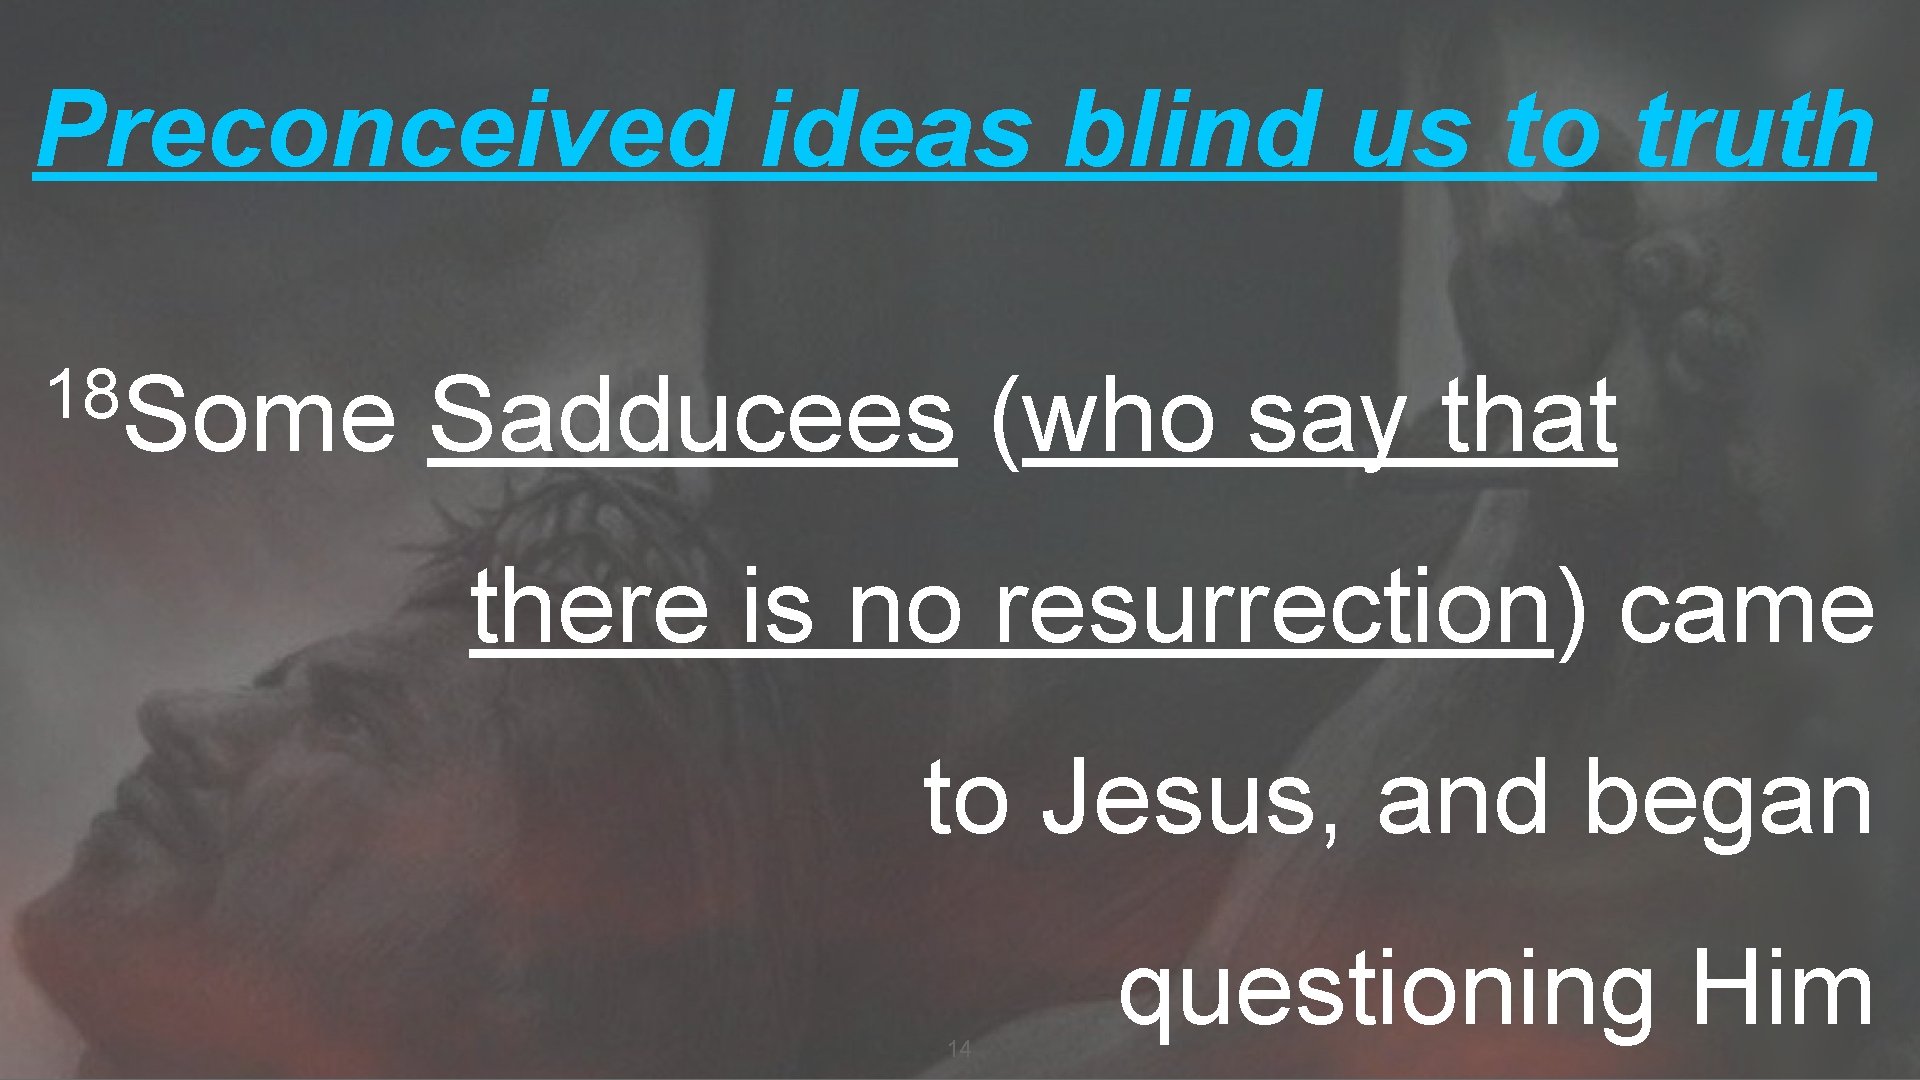 Preconceived ideas blind us to truth 18 Some Sadducees (who say that there is